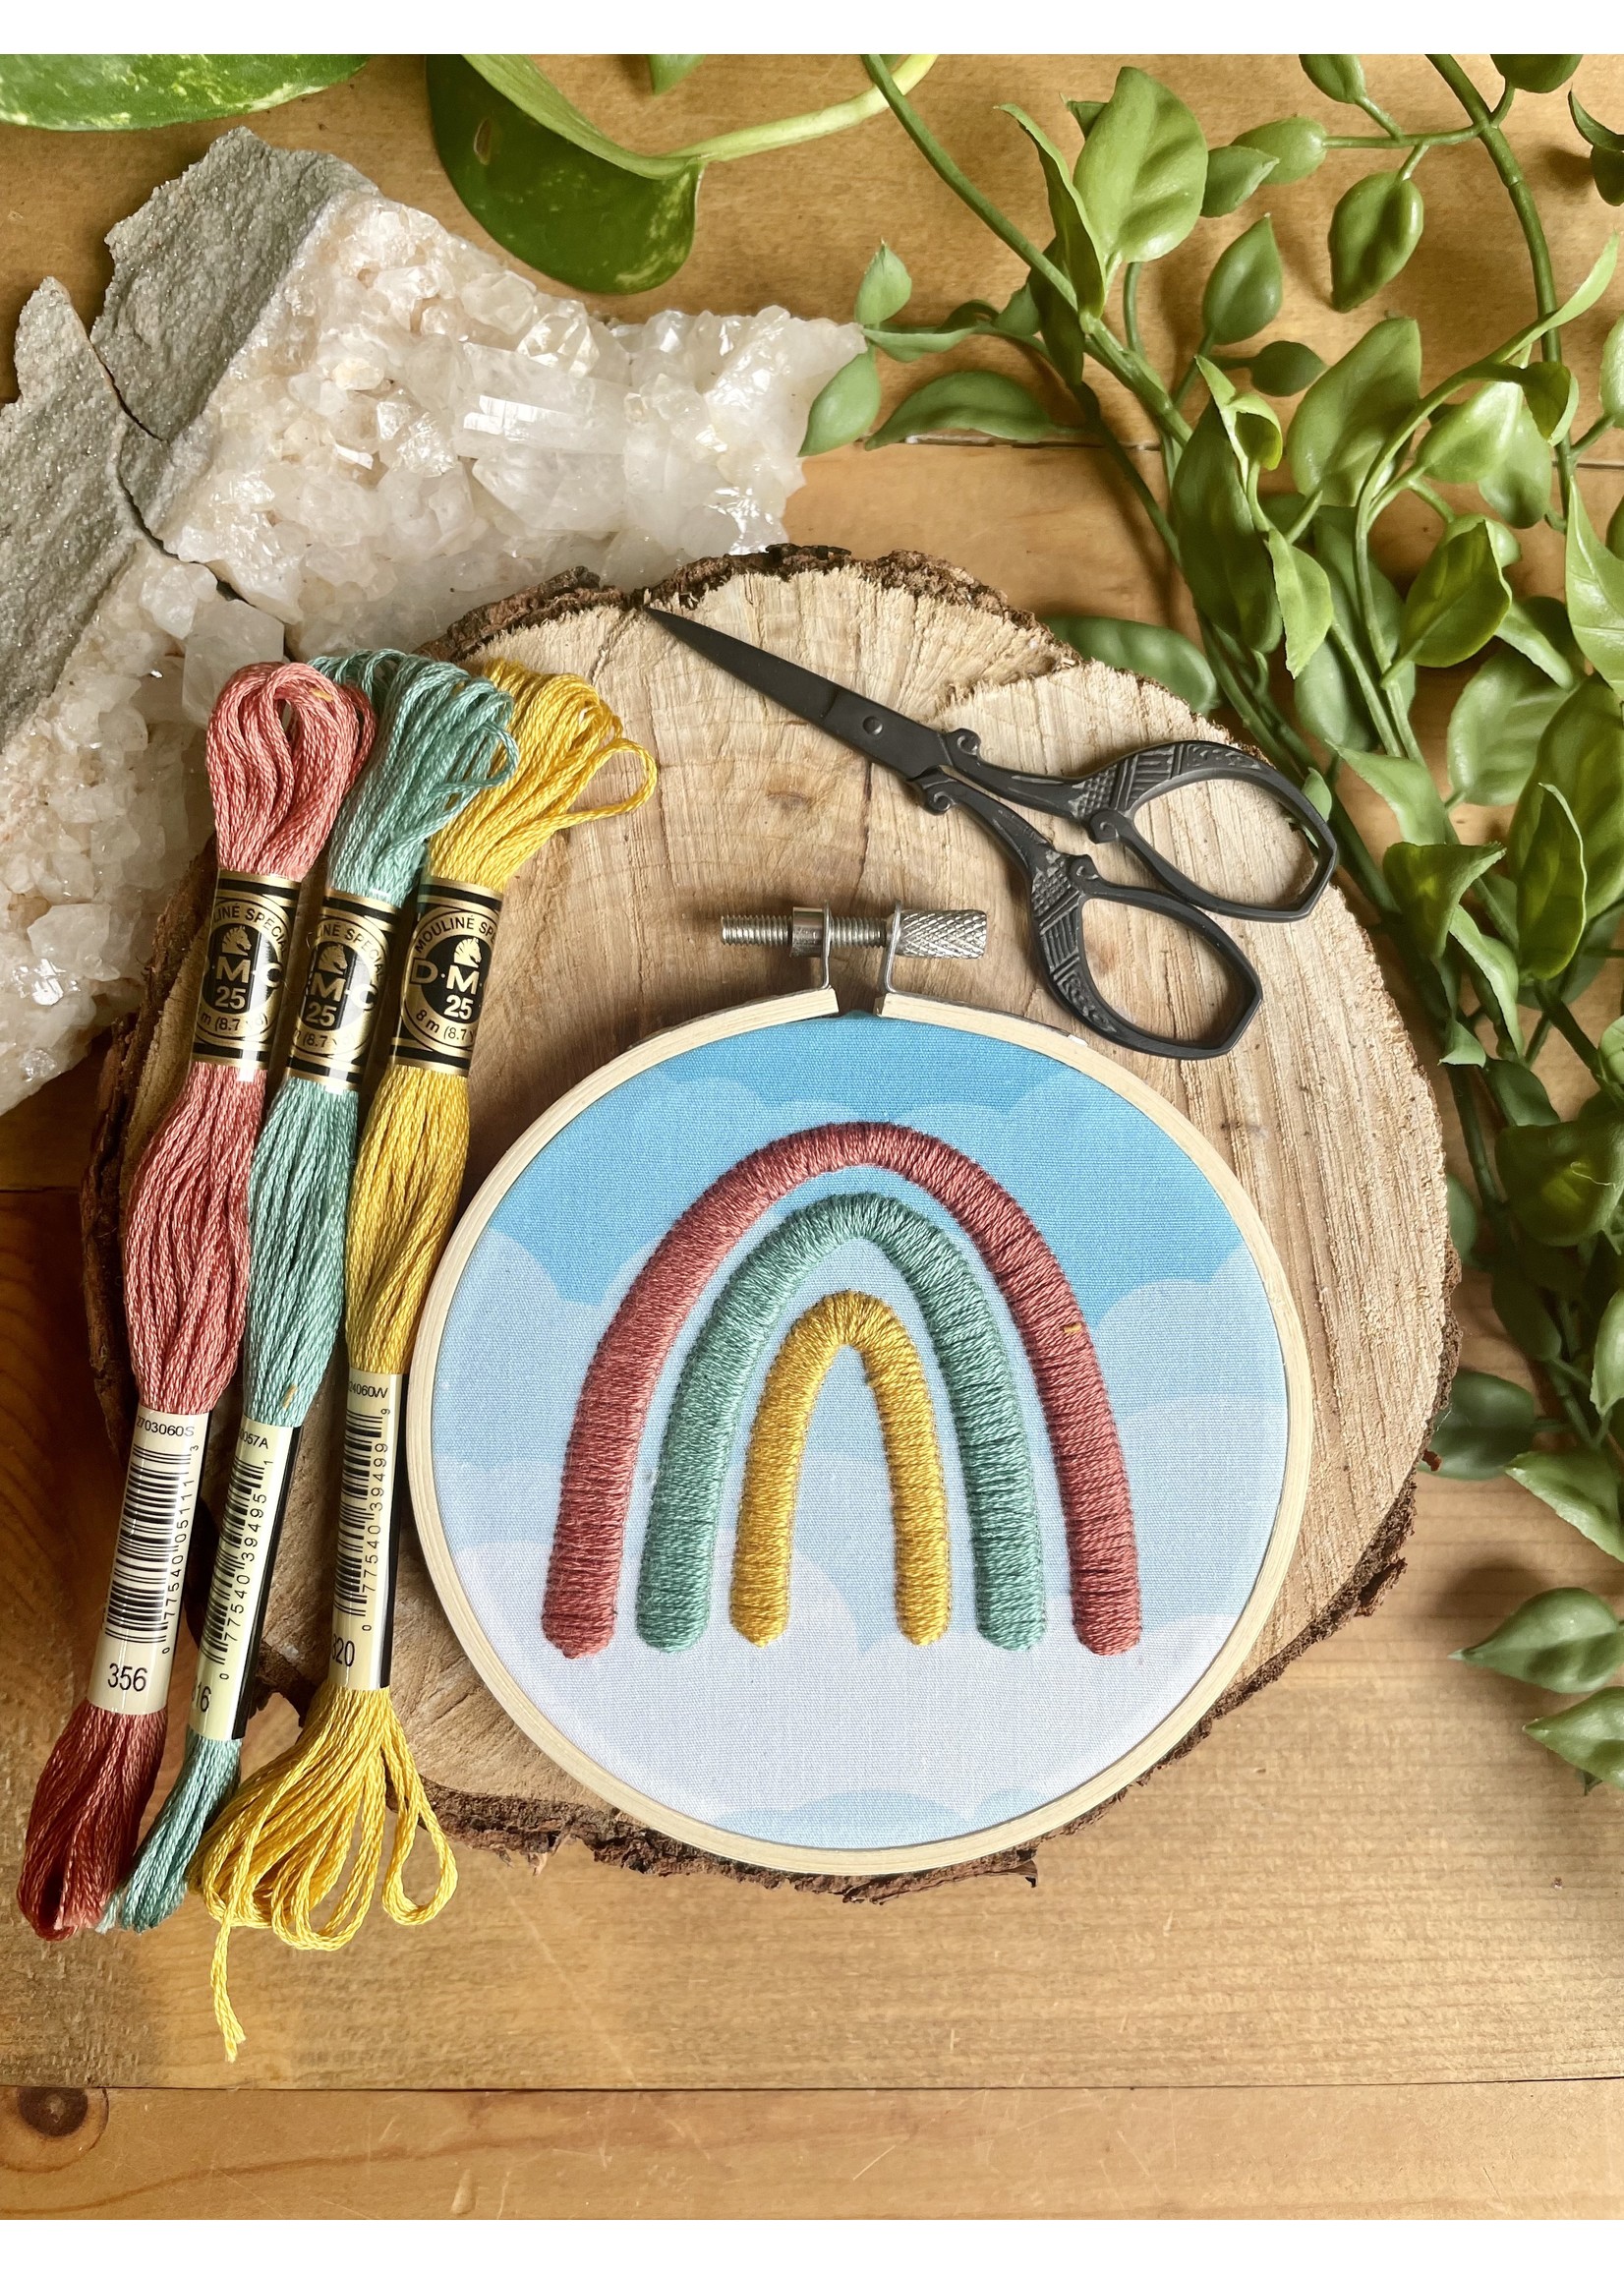 5 Set Embroidery Kit for Beginners Boho Rainbow Cross Stitch with Patterns  Embroidery Hoops Instructions Embroidery Floss Needlepoint Kits DIY Adult